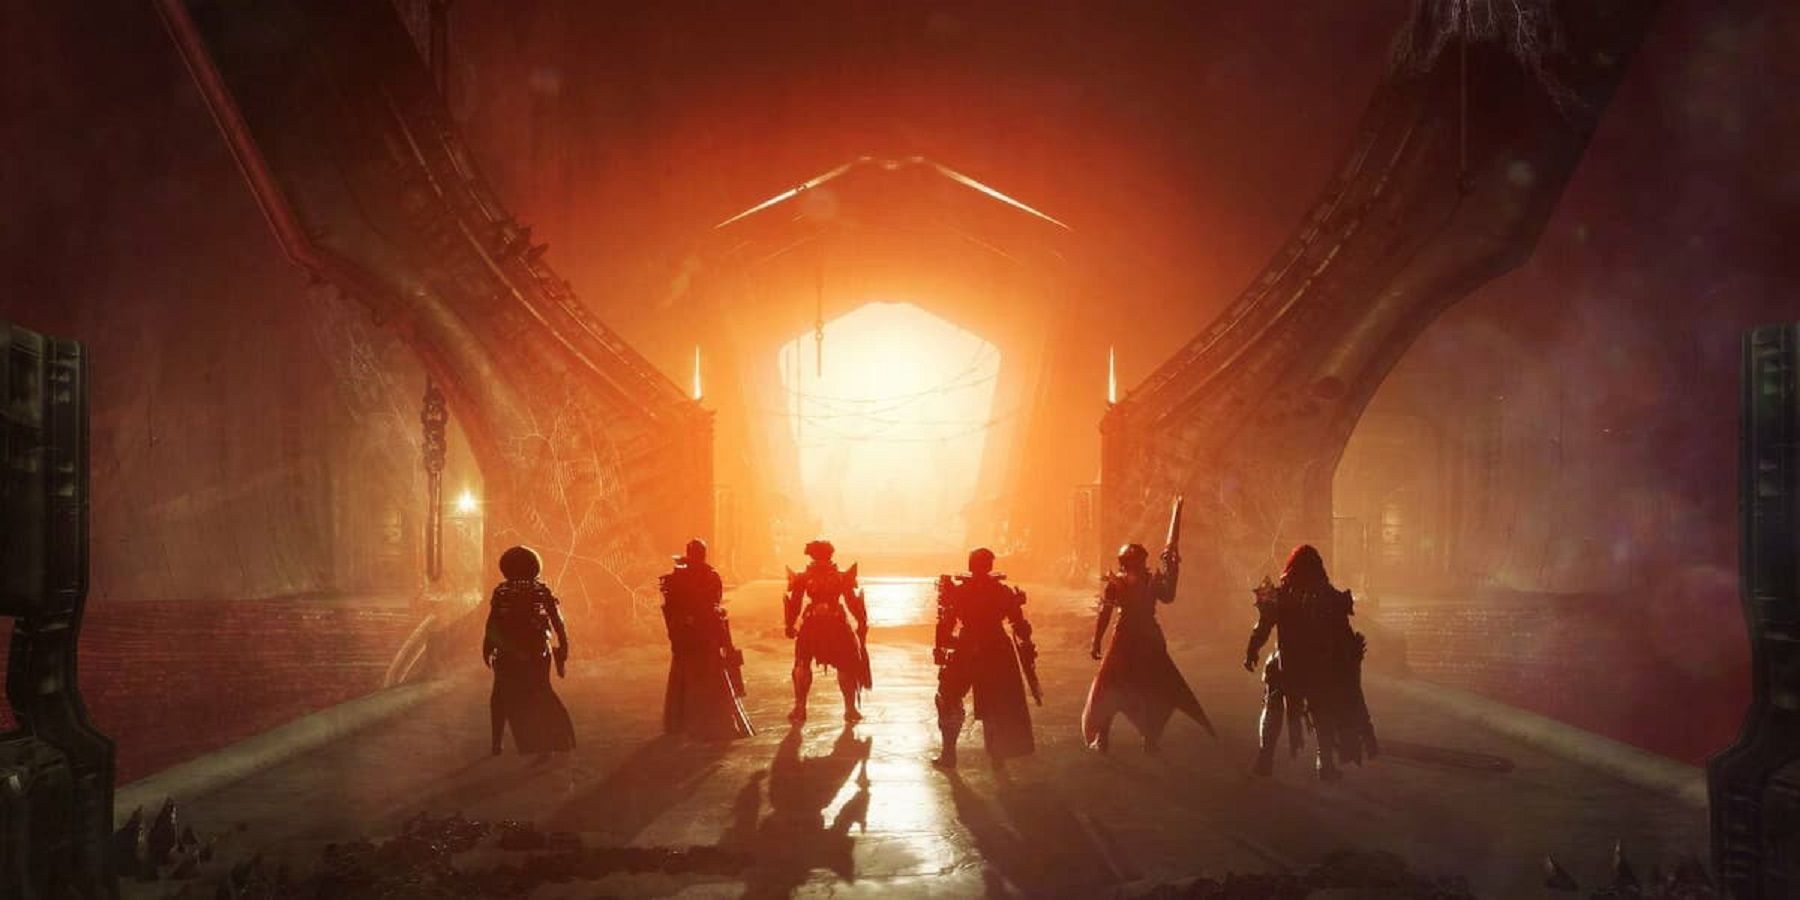 Two Destiny 2 content creators suggest a player attempting to world's first King's Fall was net limiting.